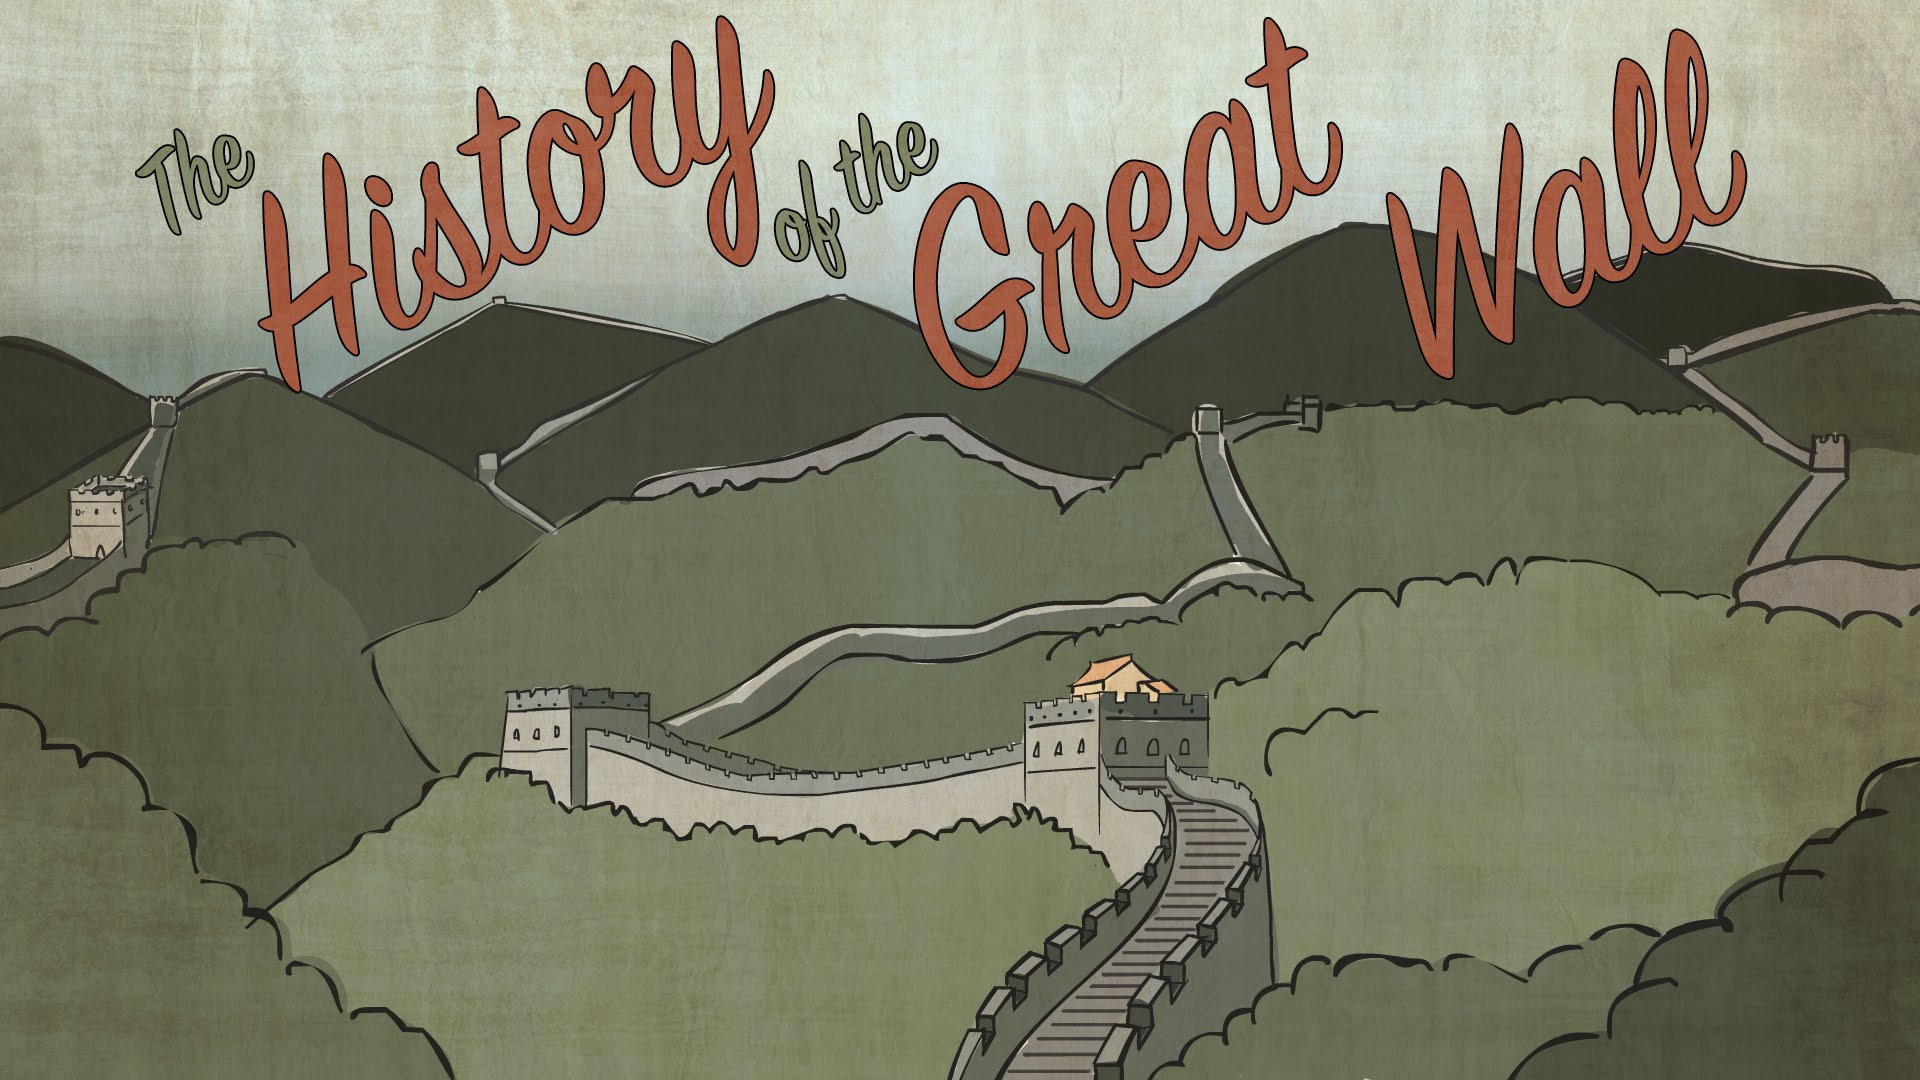 Video Great Wall Of China Hist1 1 World History To 1500 Section 4959 Diaz S